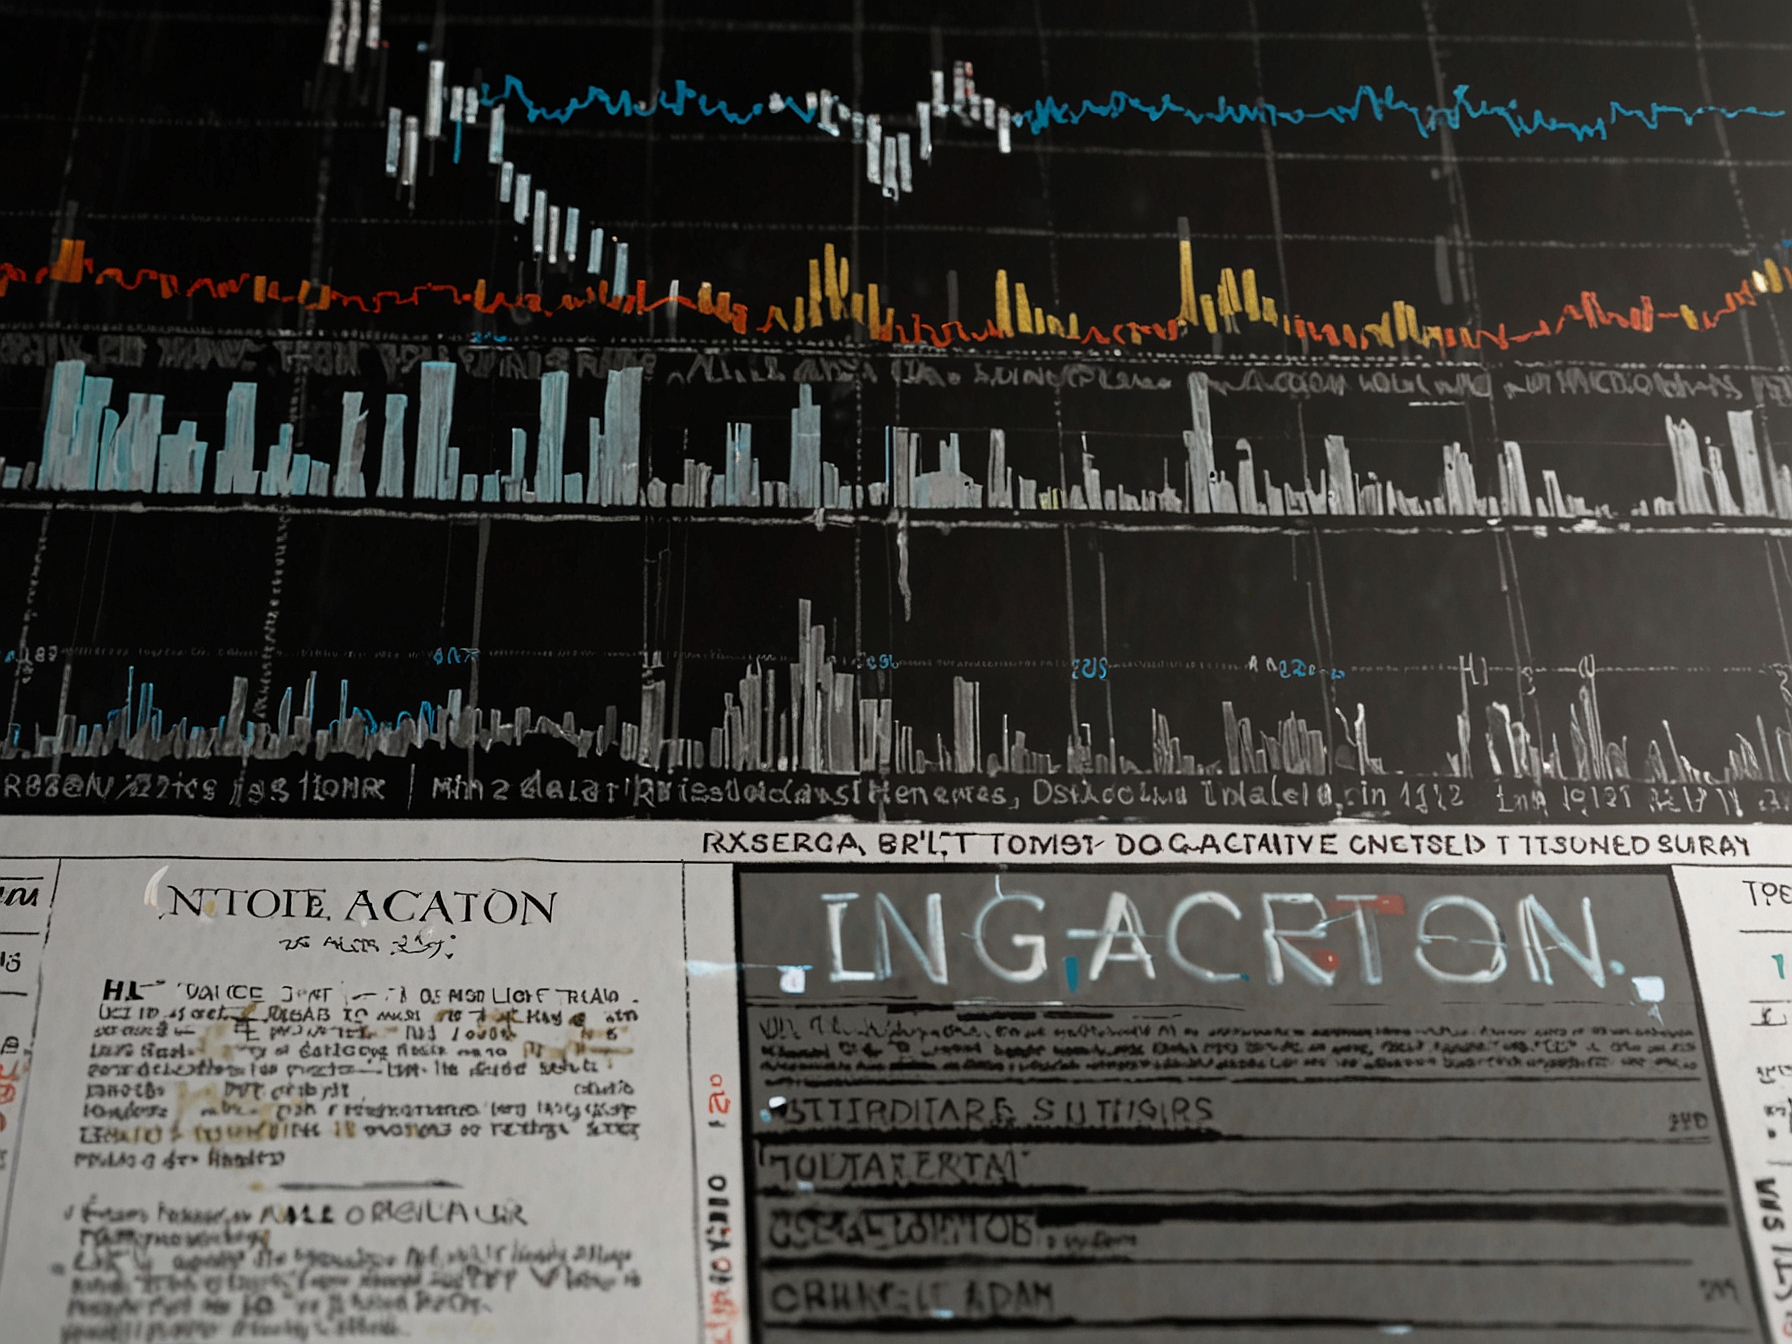 Image of a legal document titled 'Notice of Class Action' with a background of stock market tickers, highlighting the ongoing litigation and its impact on investors.